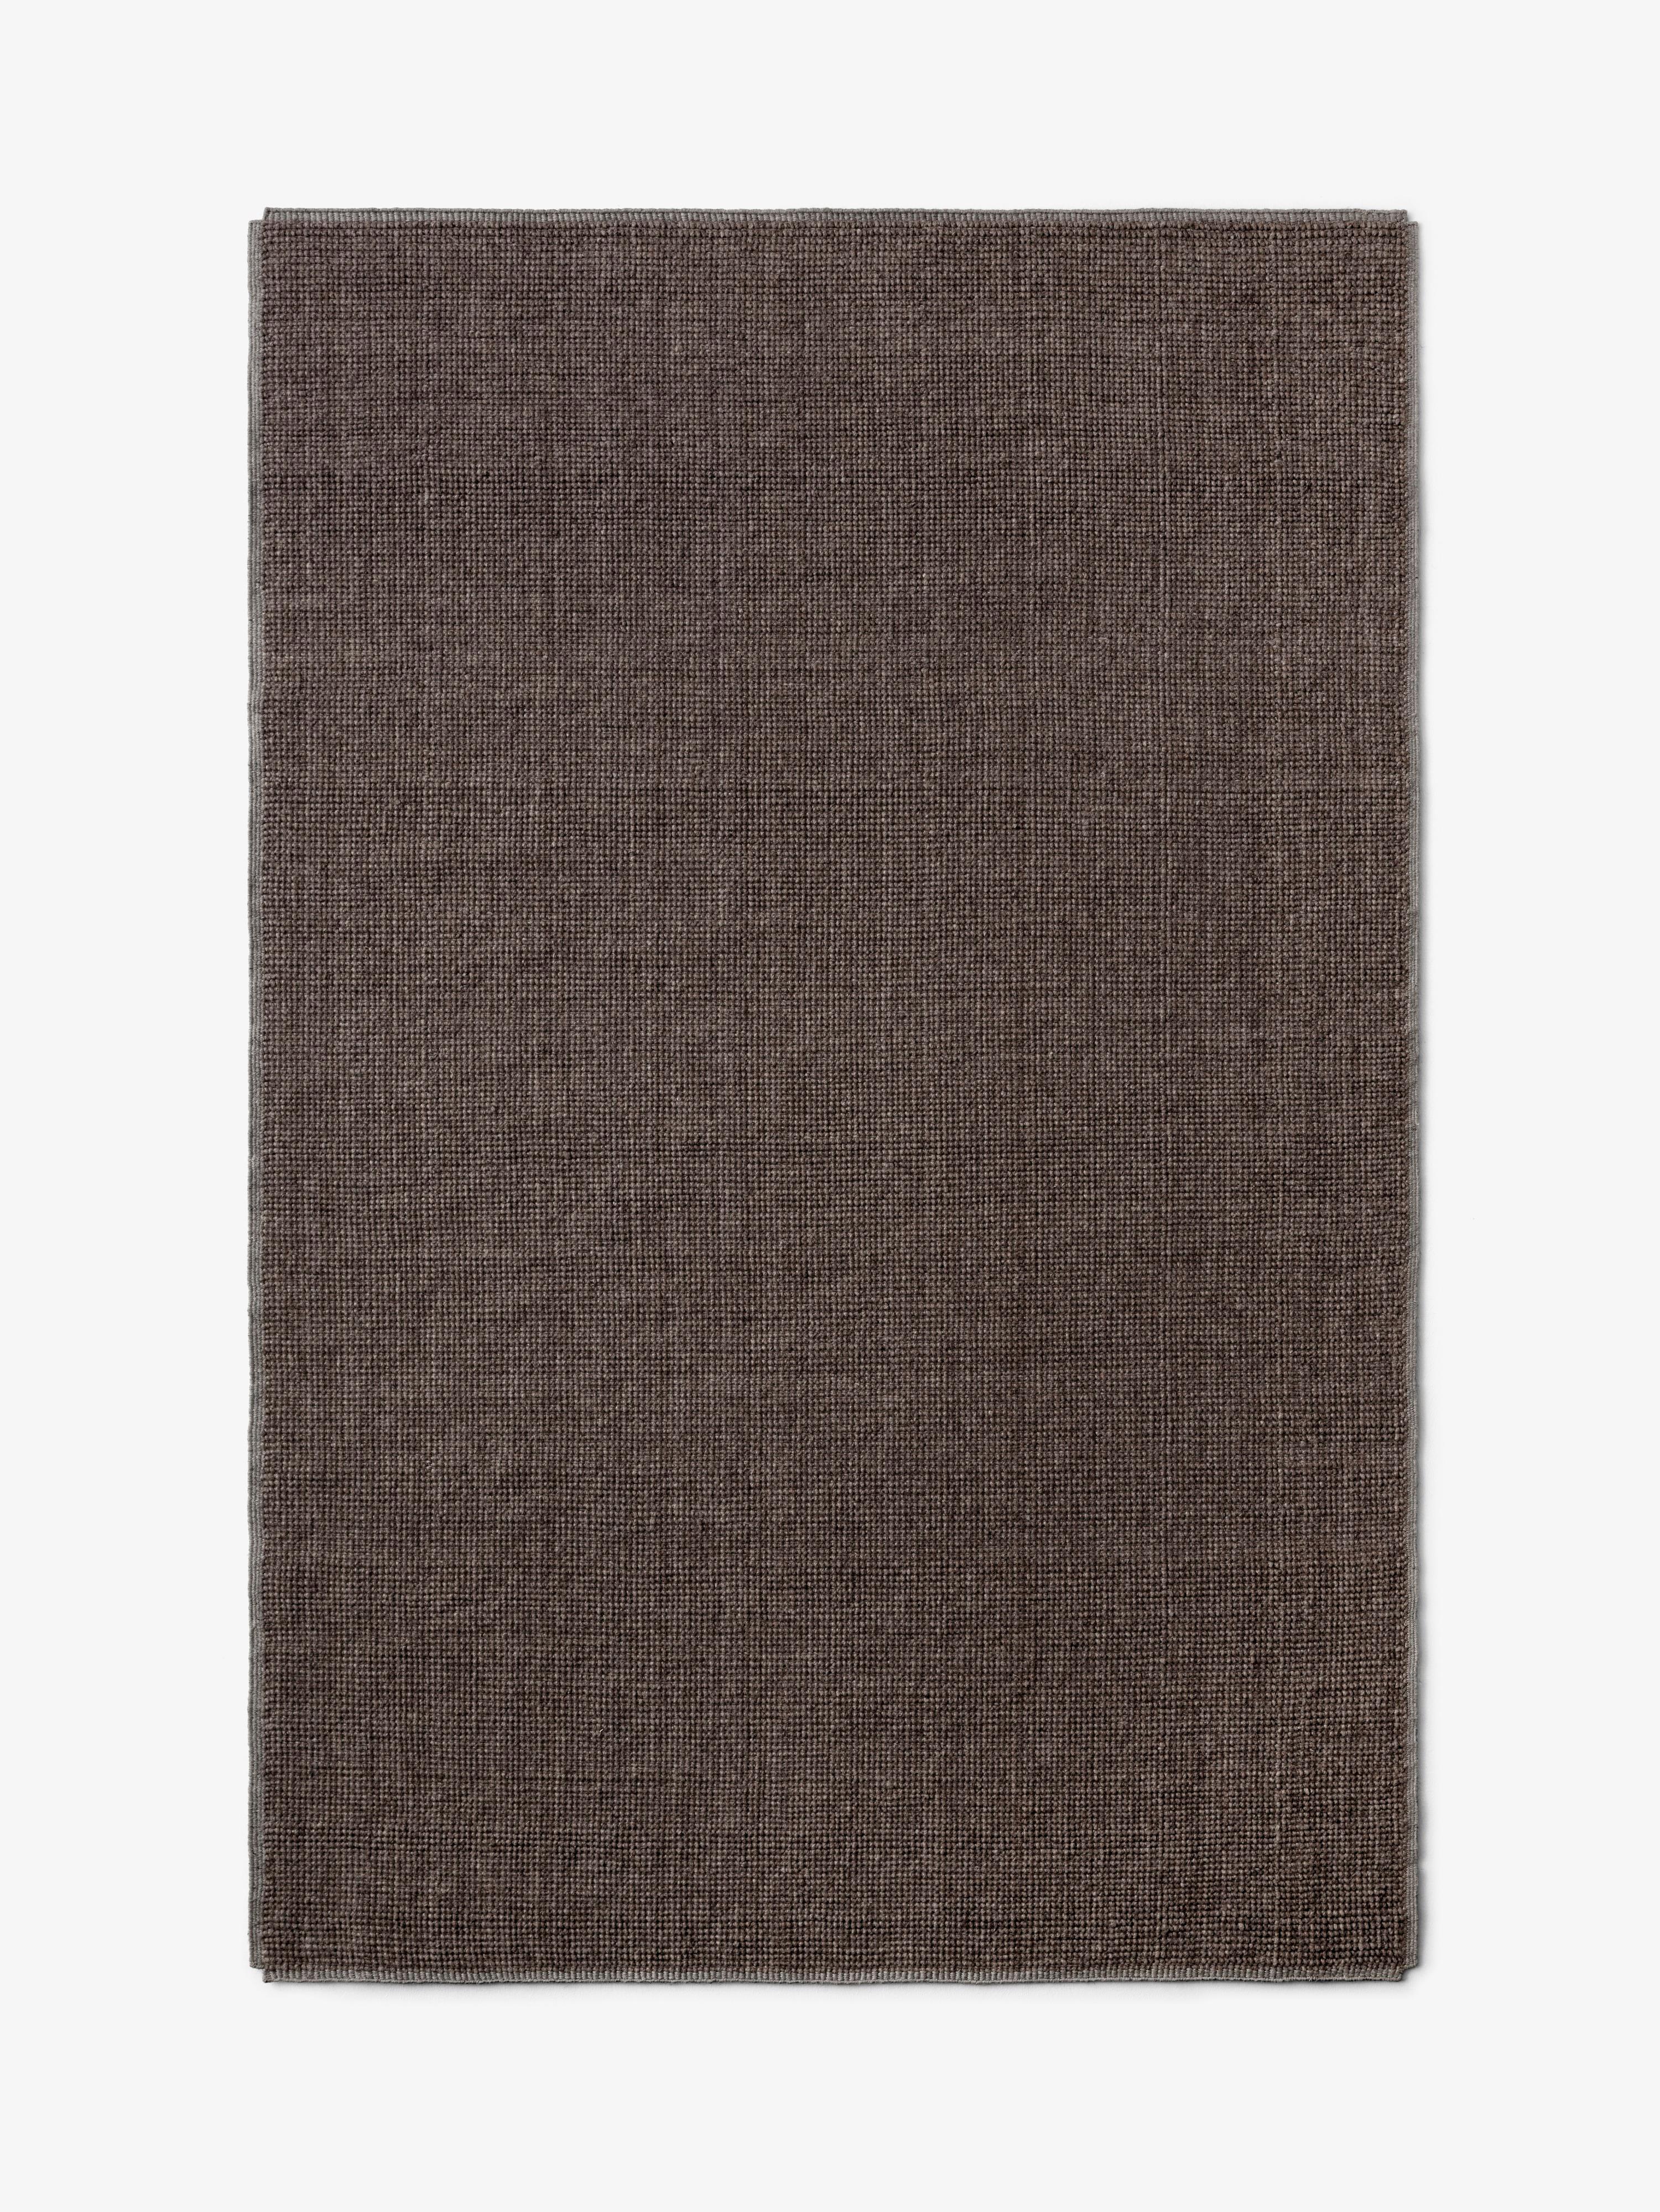 The Collect rugs are crafted by skilled artisans in Bikaner, India, with the undyed natural wool woven on a handloom. The work and expertise invested into each rug underscores the artistry of the piece that can be found in both Collect's design as